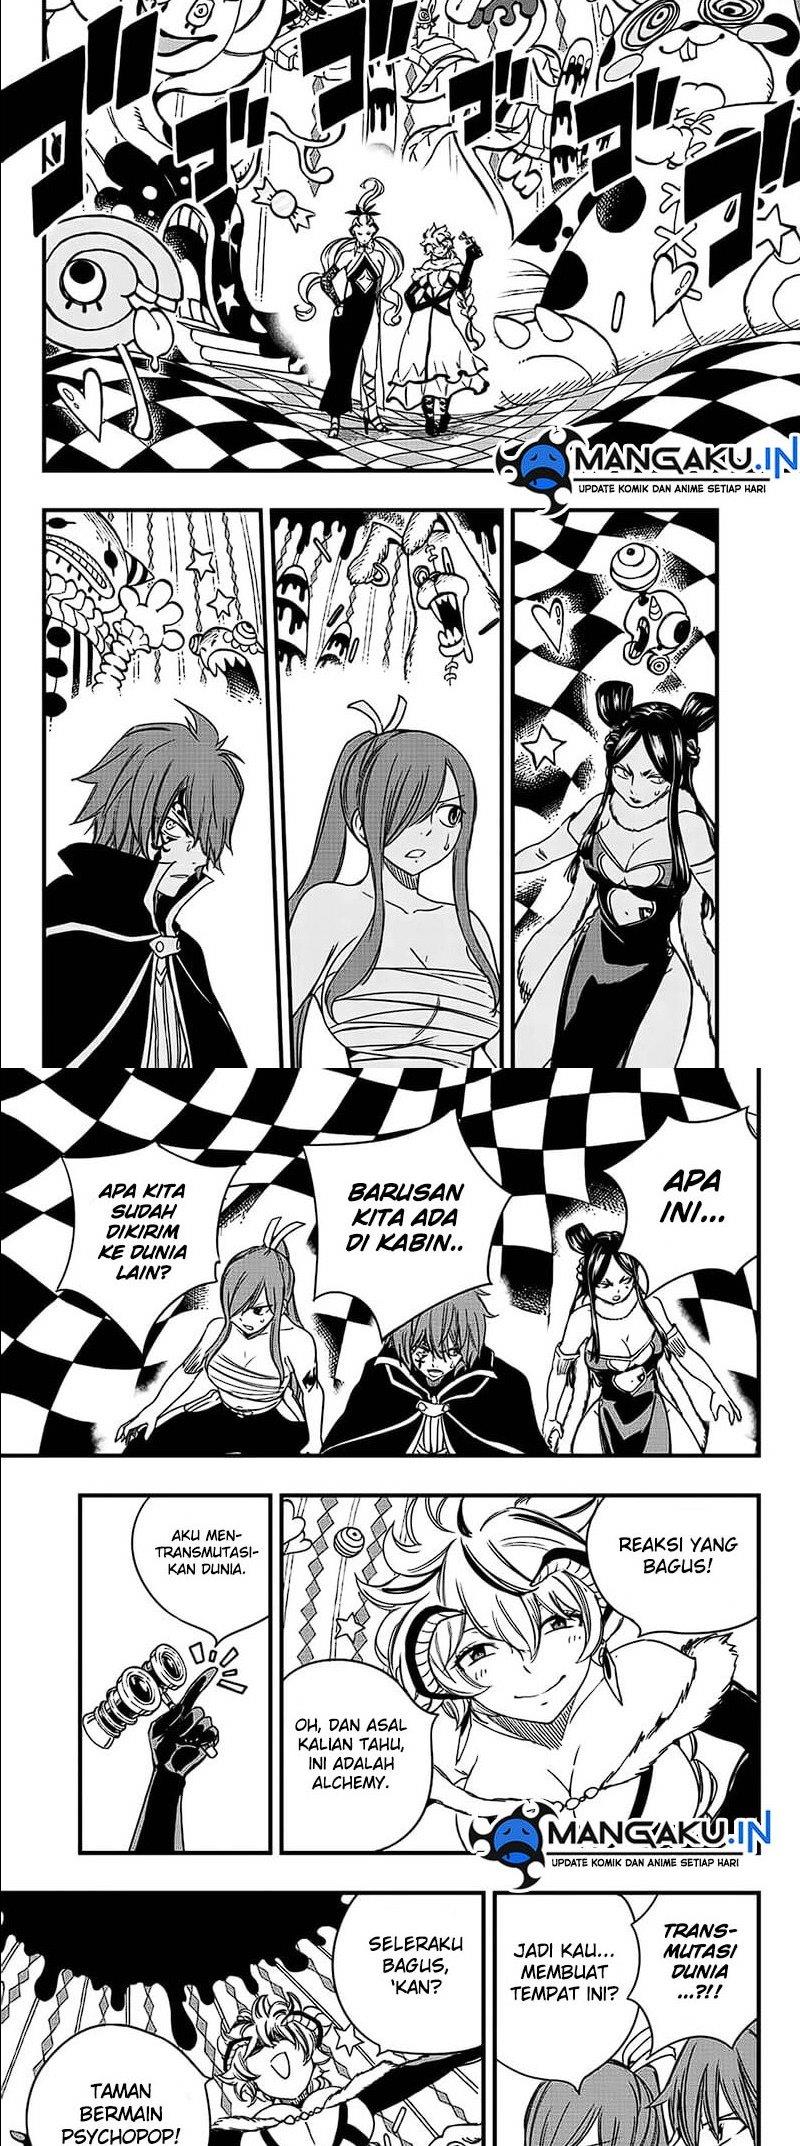 Fairy Tail: 100 Years Quest Chapter 132